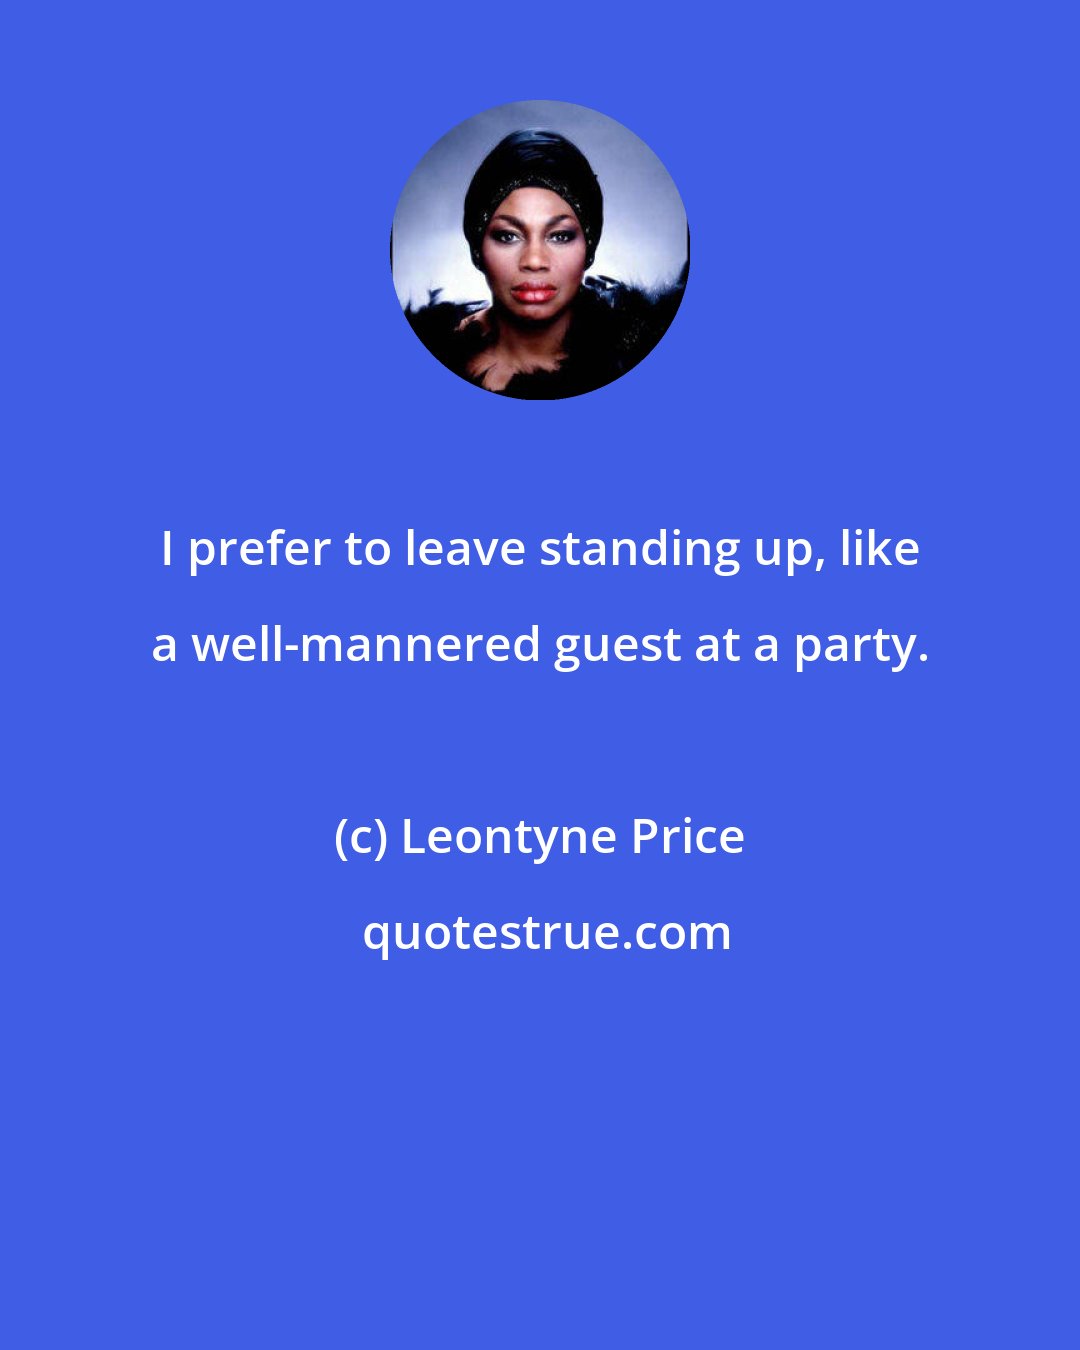 Leontyne Price: I prefer to leave standing up, like a well-mannered guest at a party.